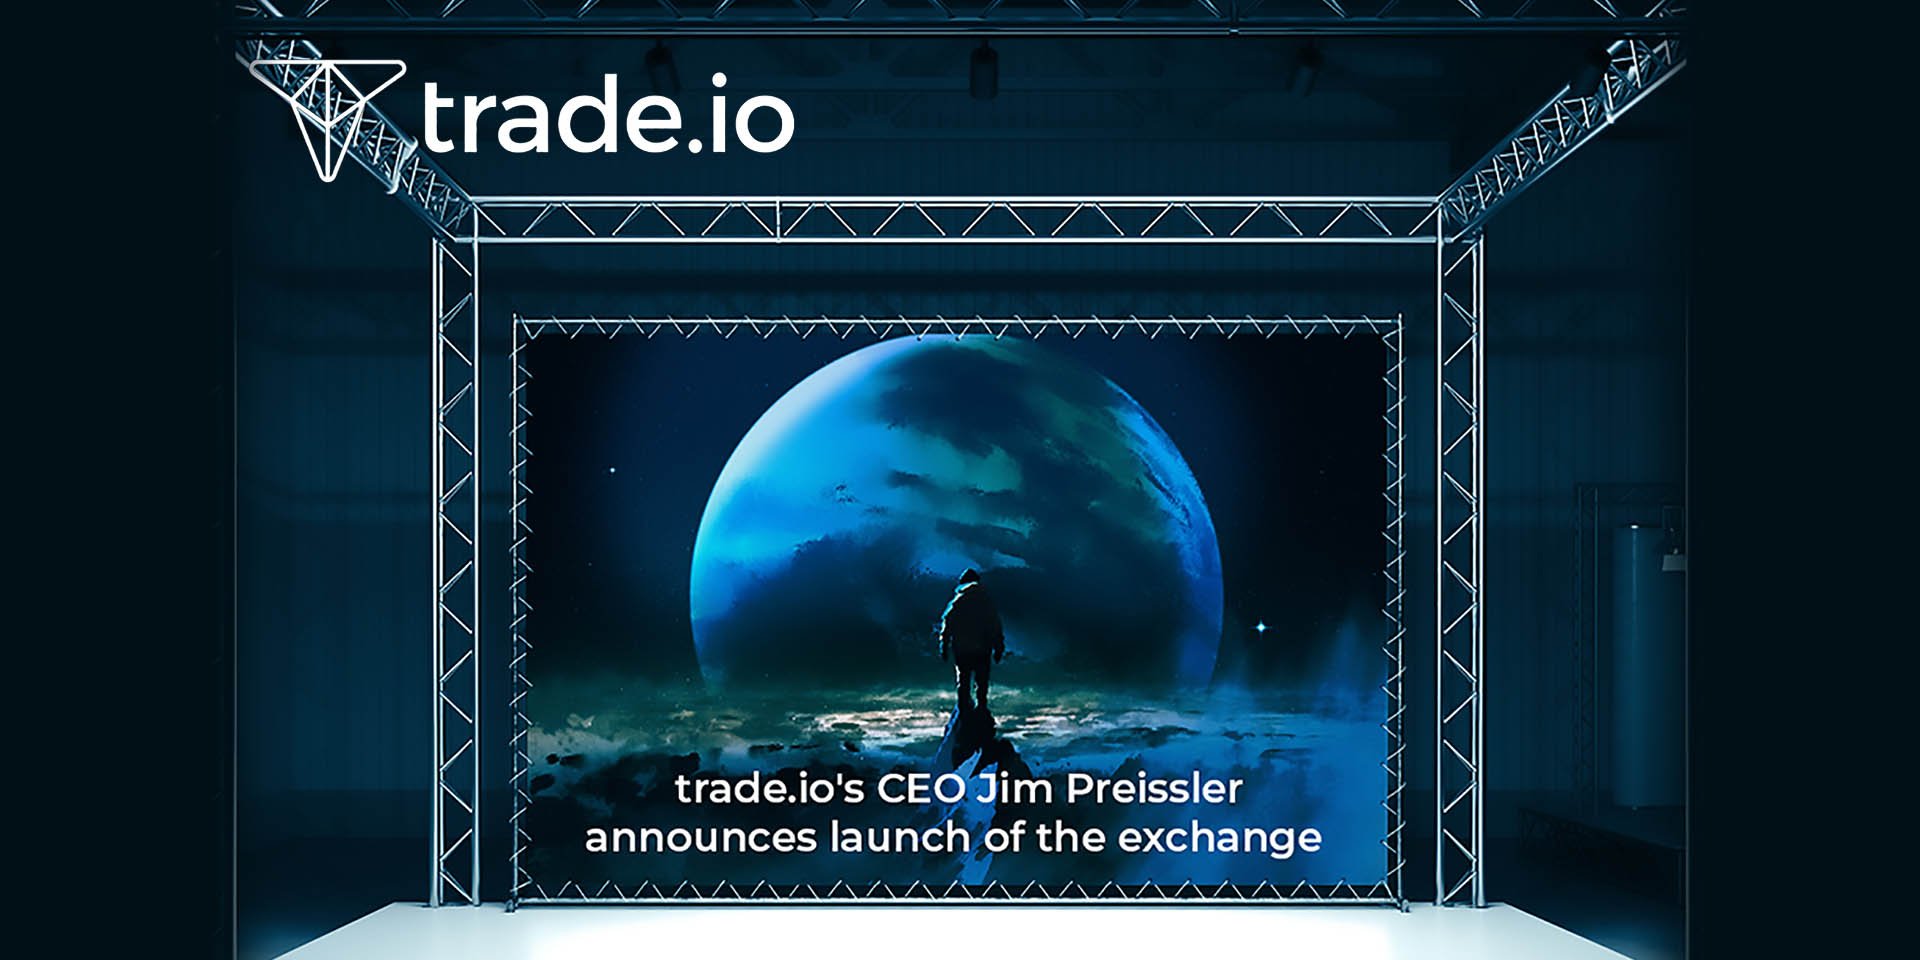 trade.io Announces Official Launch Of Its Highly Anticipated, Customizable Crypto Exchange at Simultaneous London Events